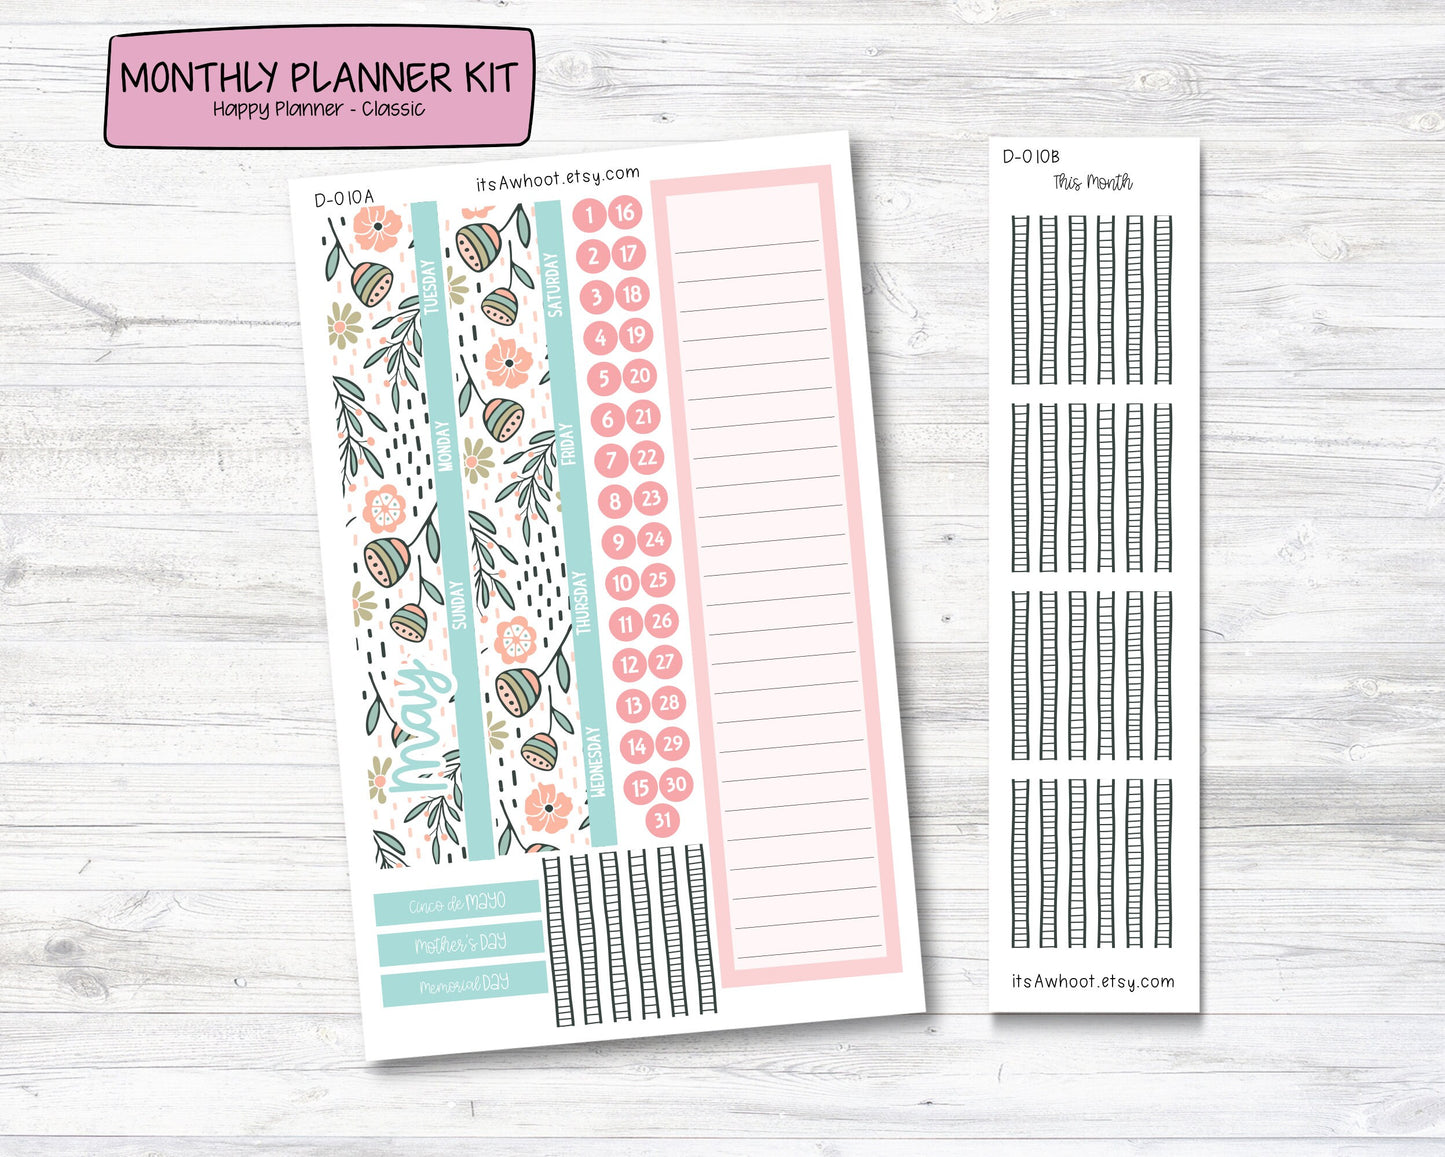 MONTHLY Kit Planner Stickers - MAY "Love, Mom" - Happy Planner CLASSIC (D010)